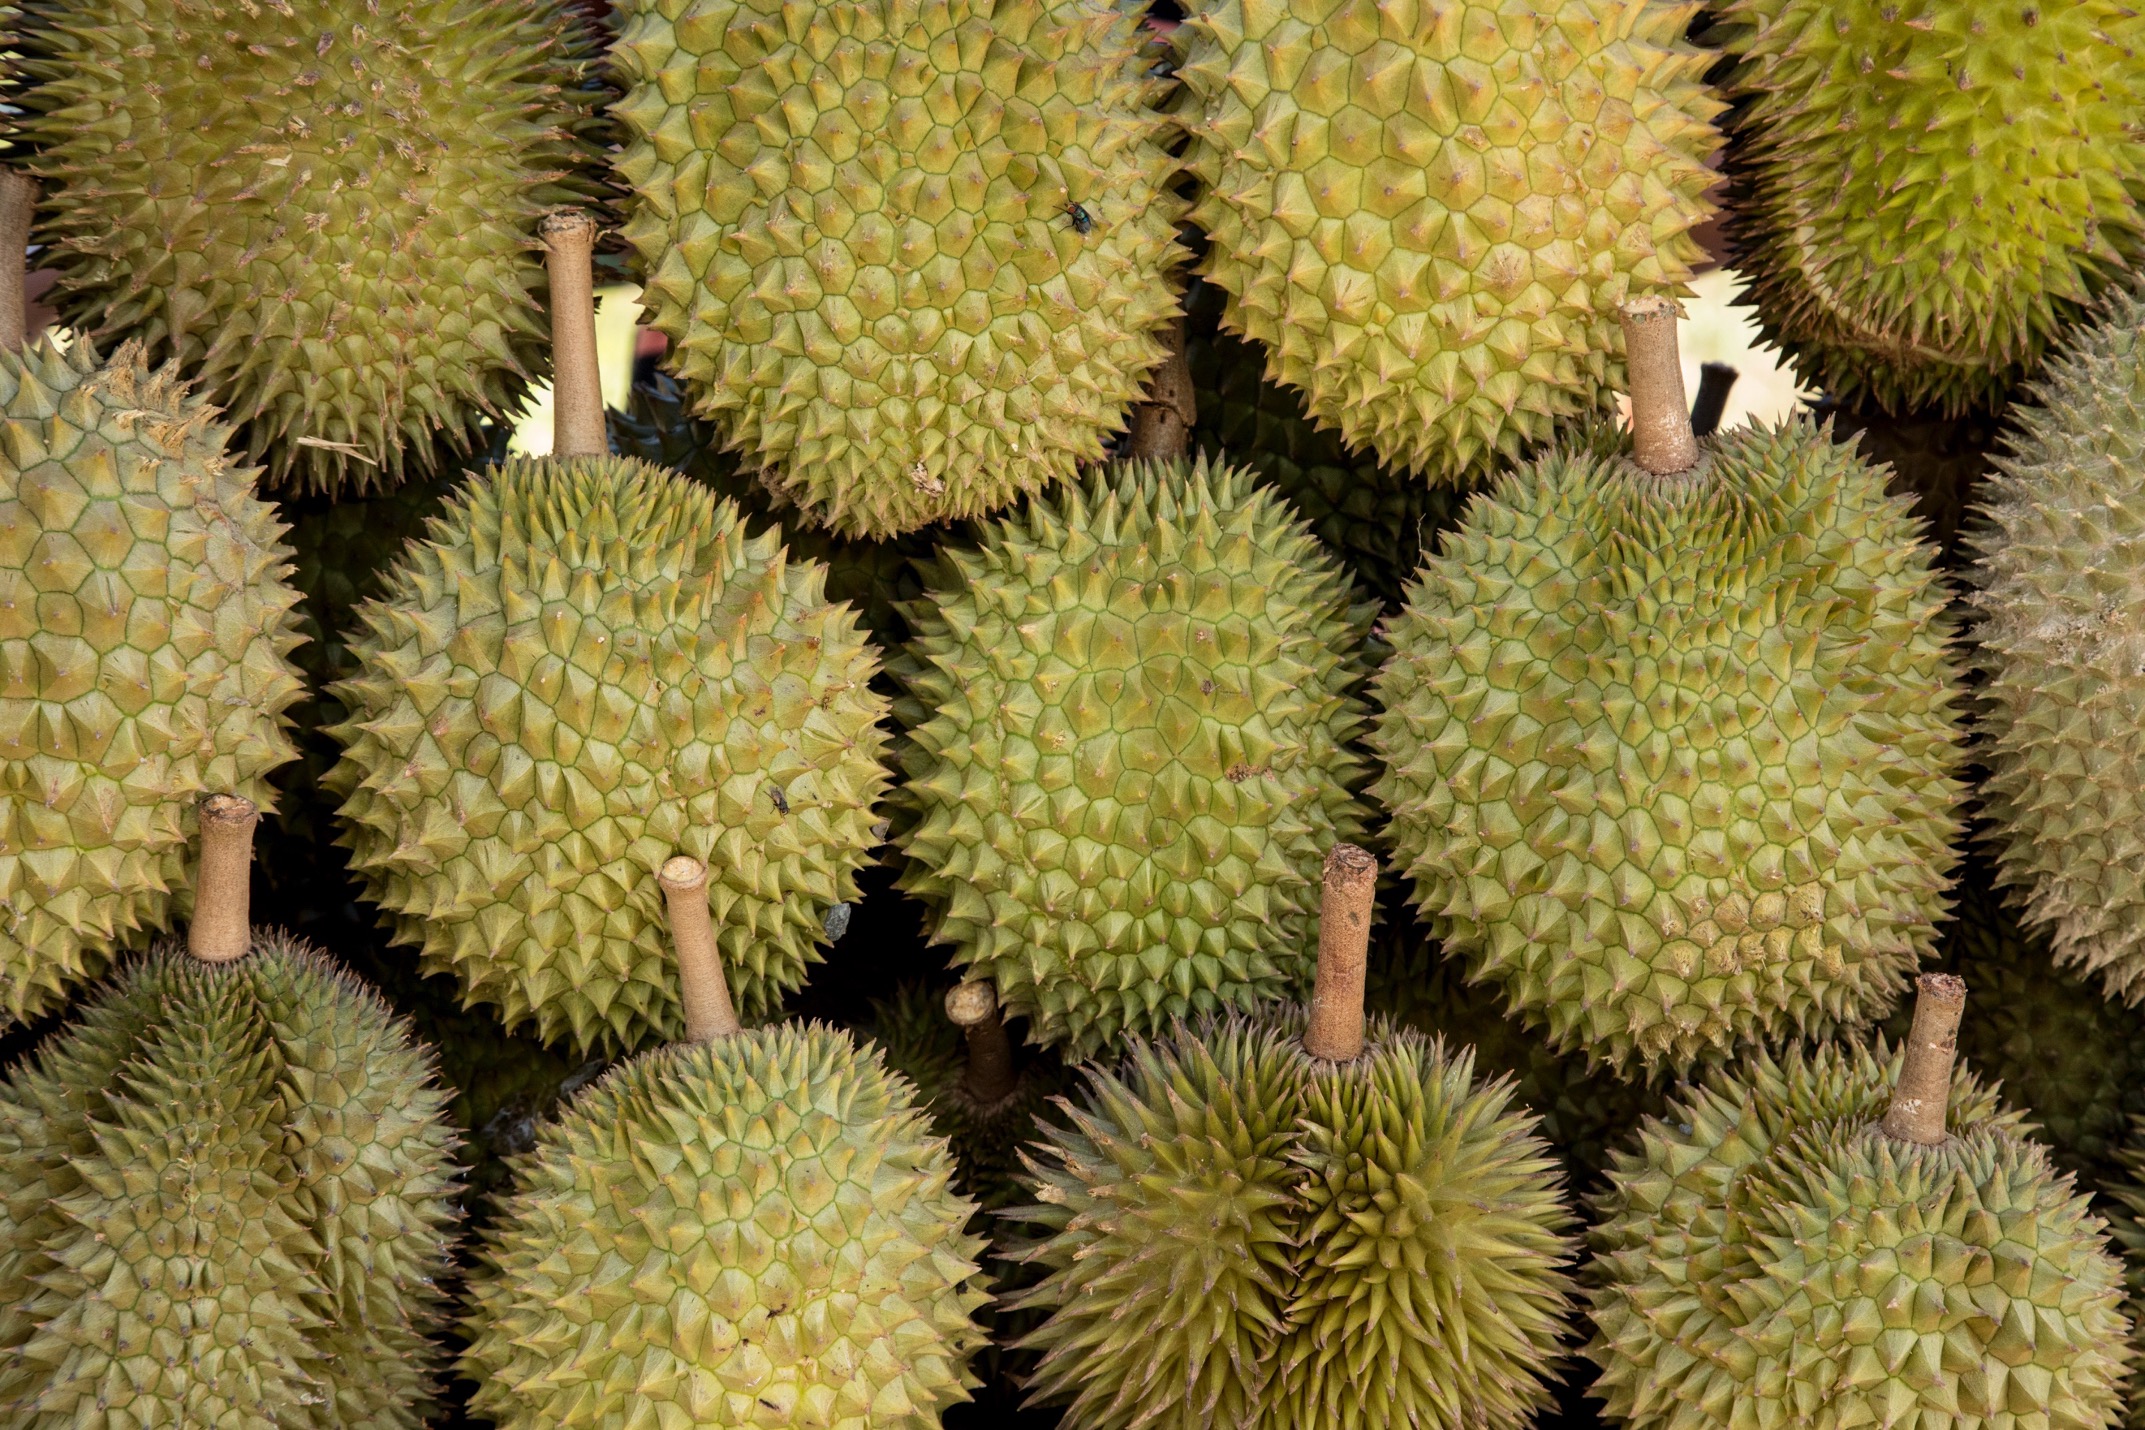 layers of durian fruit in a market in borneo